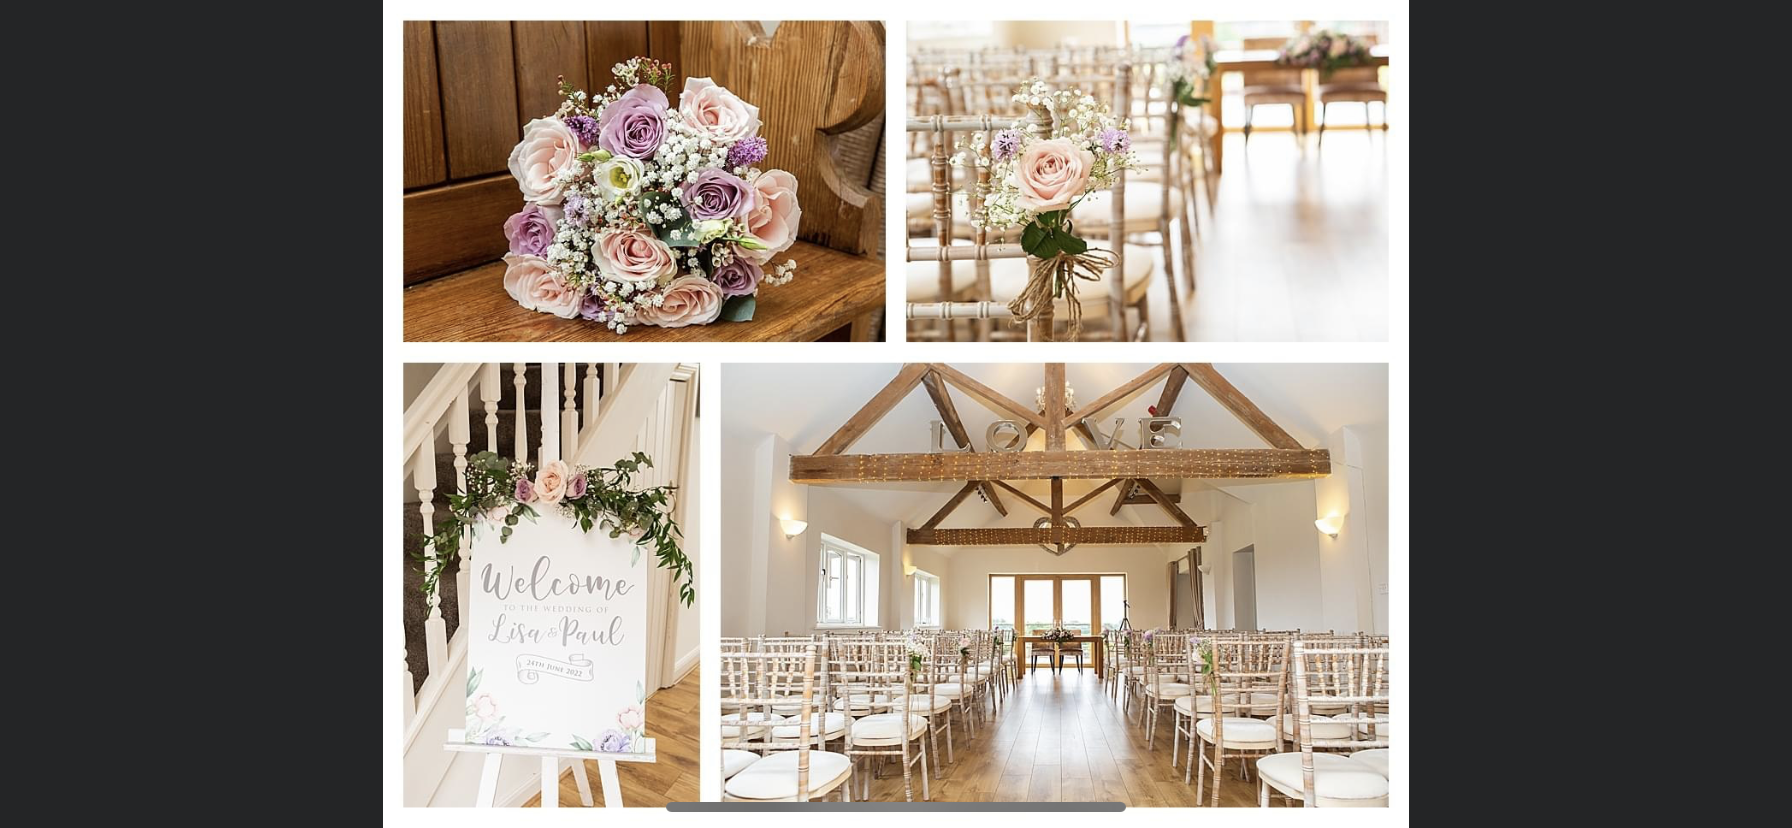 Bordesley Park weddings with flair with flowers